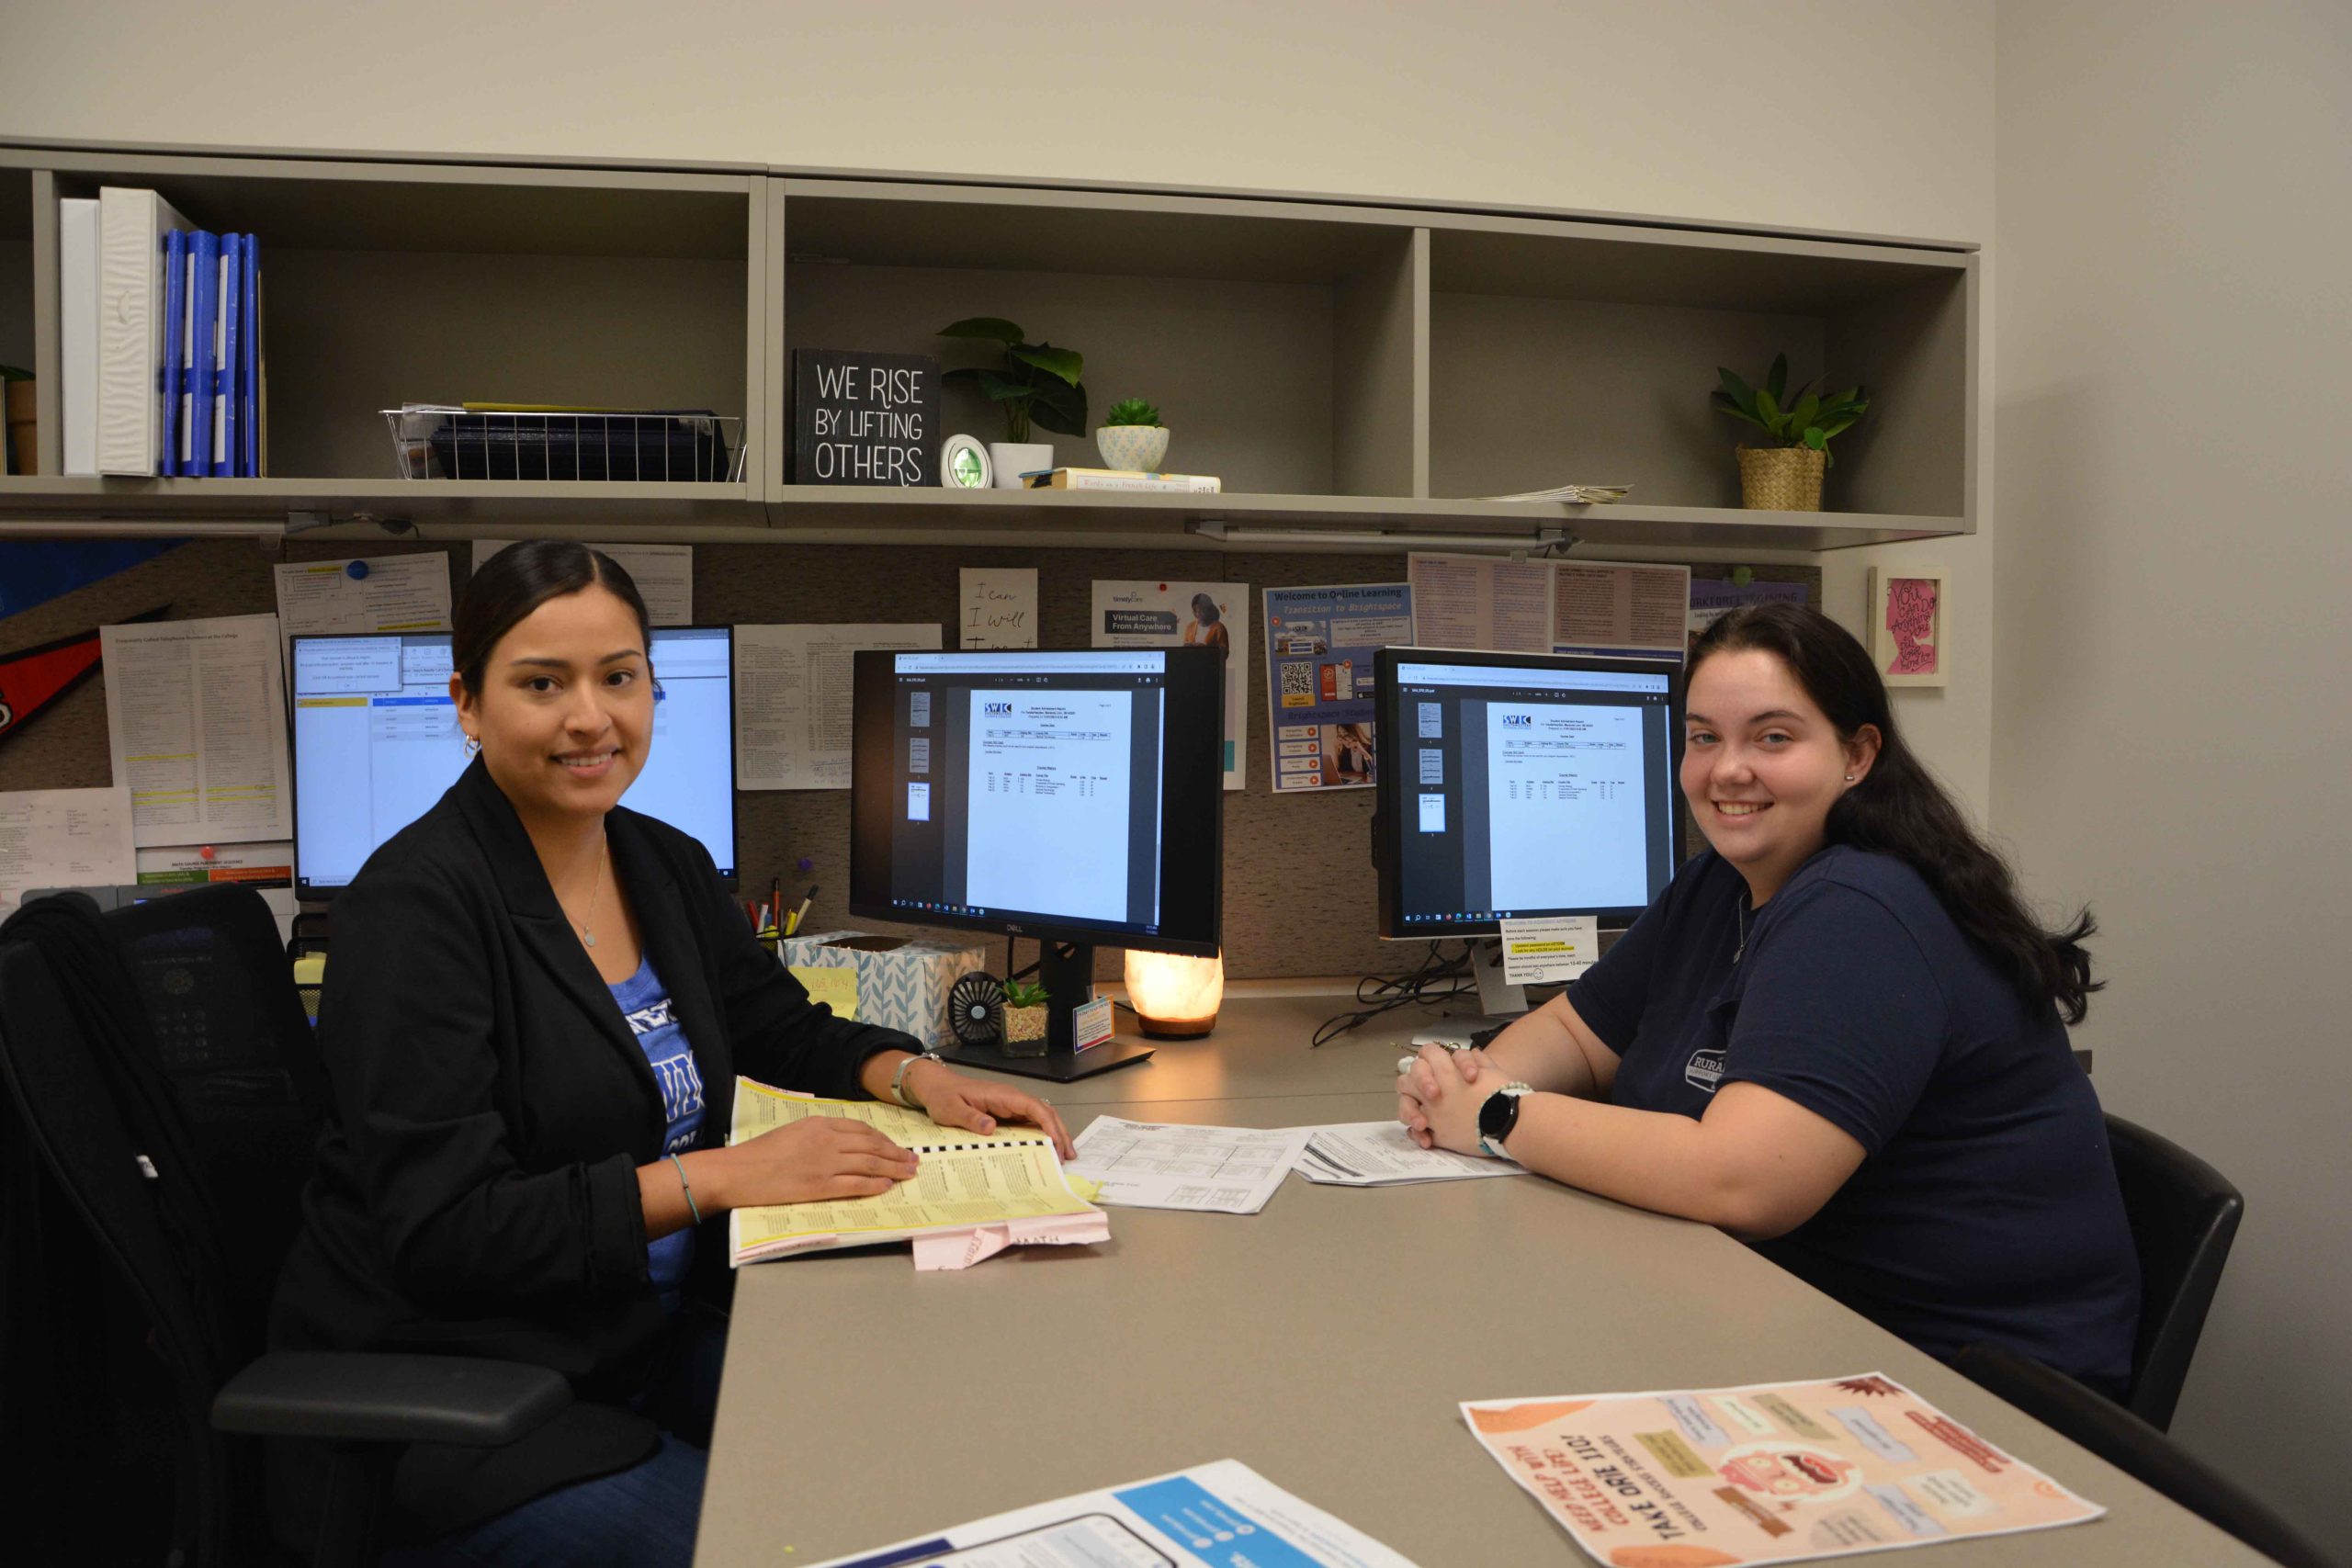 Enrollment services staff member and student